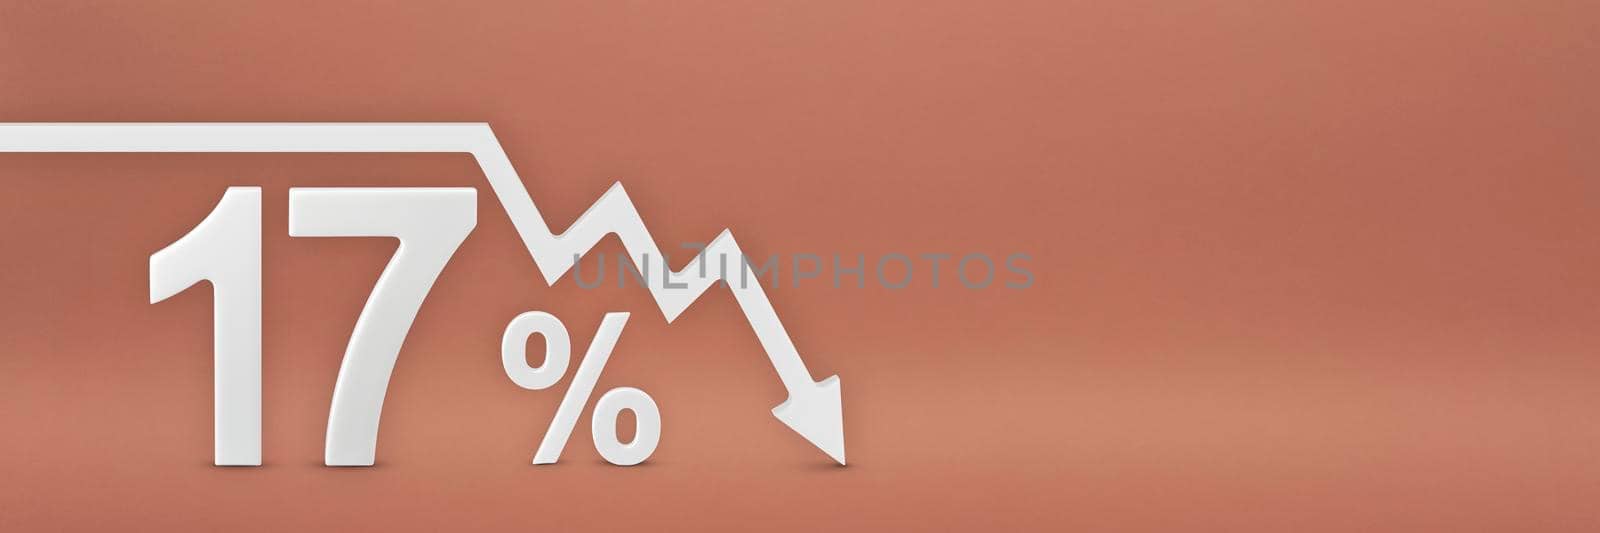 seventeen percent, the arrow on the graph is pointing down. Stock market crash, bear market, inflation. Economic collapse, collapse of stocks. 3d banner, 17 percent discount sign on a red background. by SERSOL